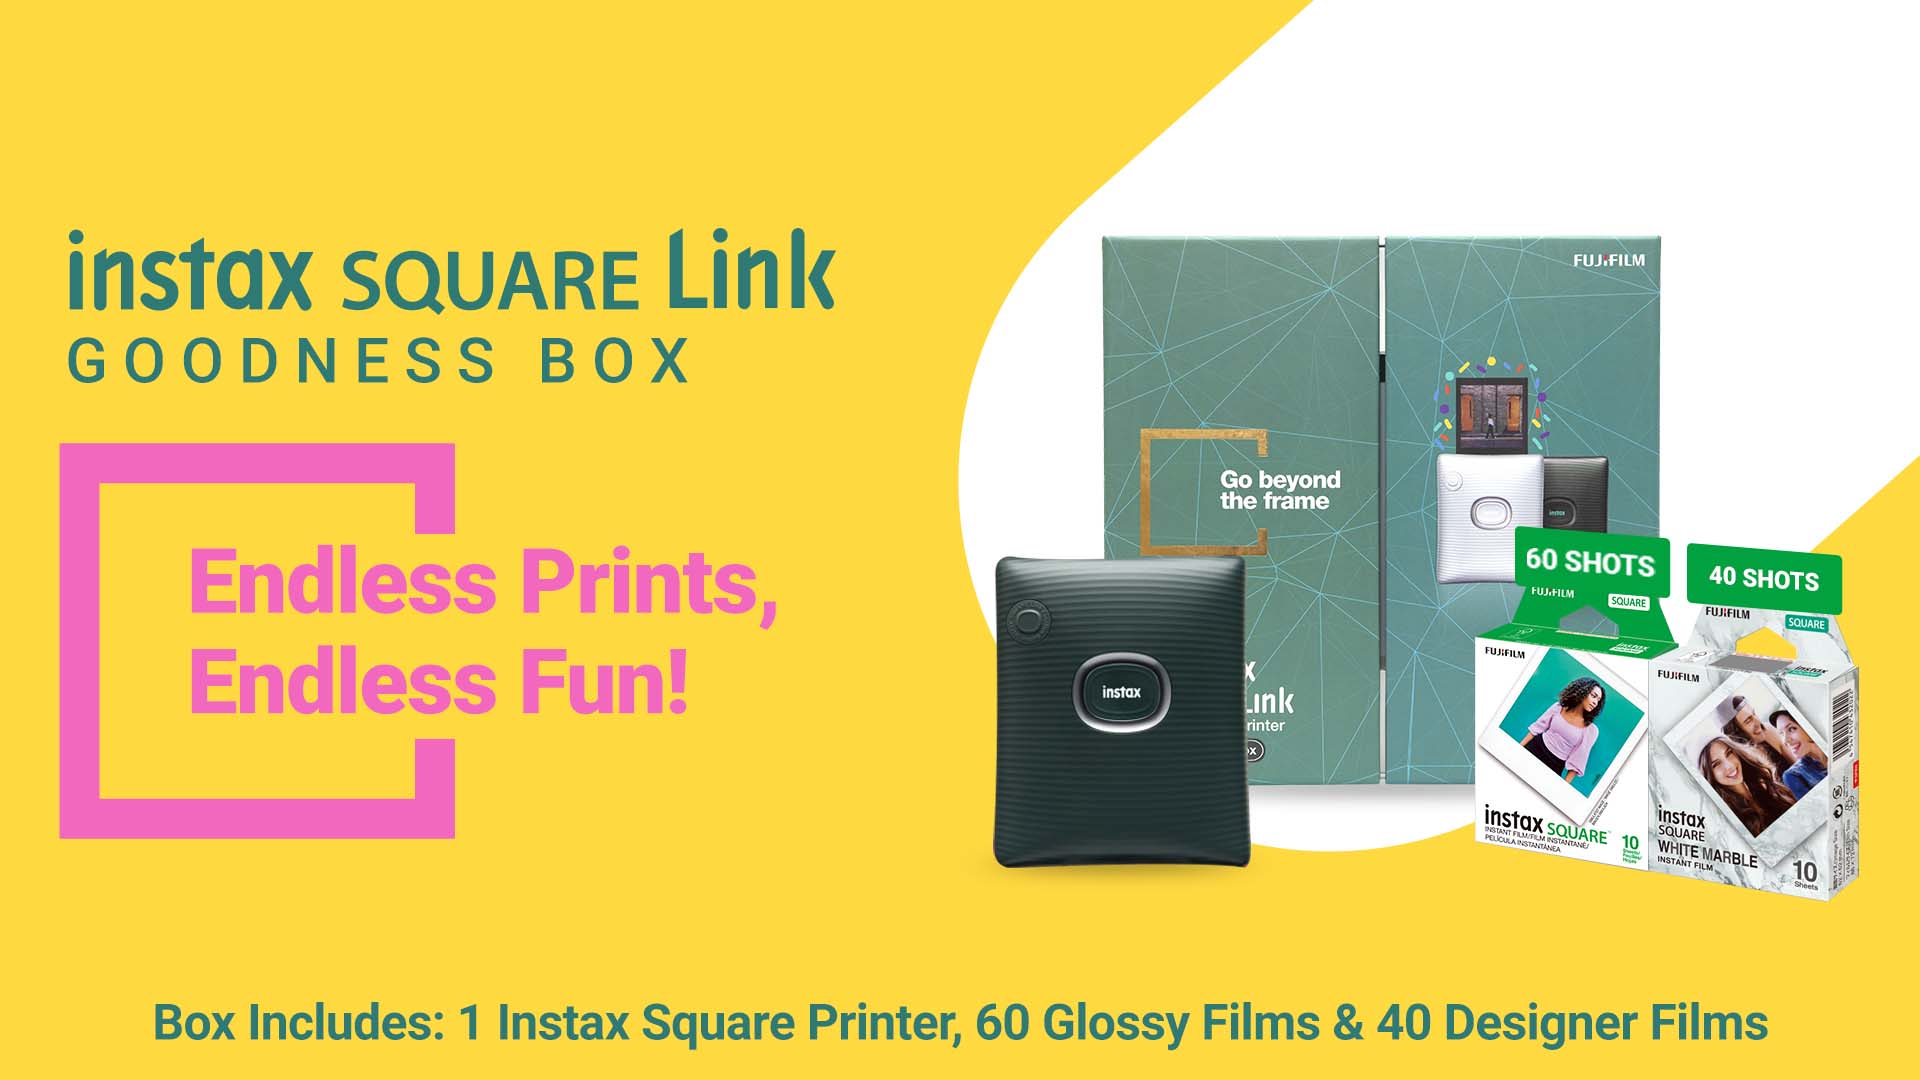 Instax Square Link Goodness Box